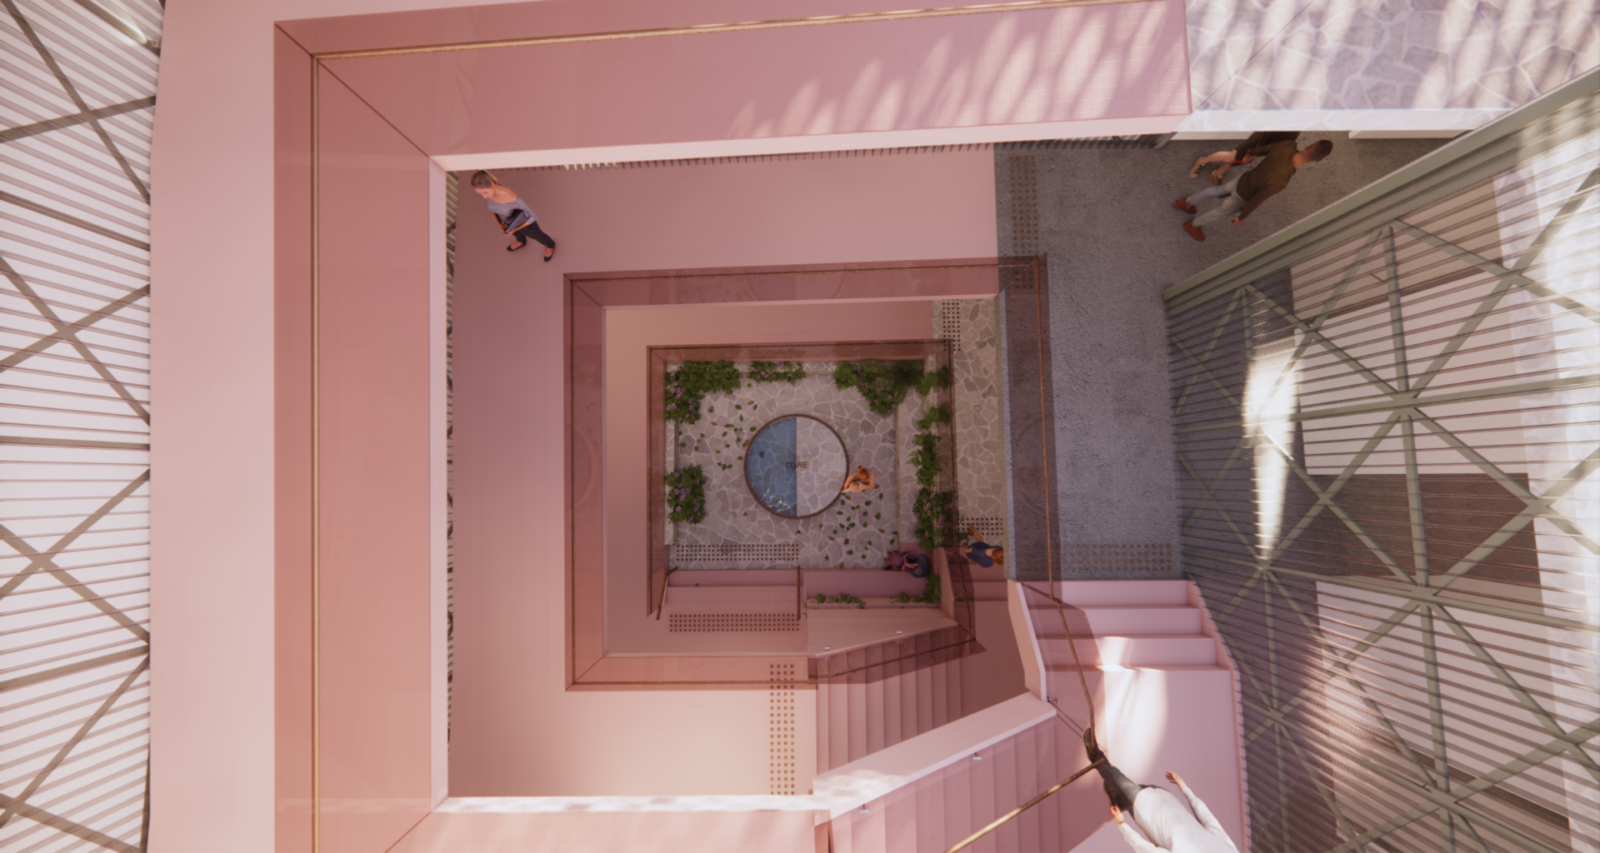 A birdseye view down the atrium shows the light pink stairs and ramps wrapping around the atrium. The circular pond at the bottom provides a vertical connection through the space.